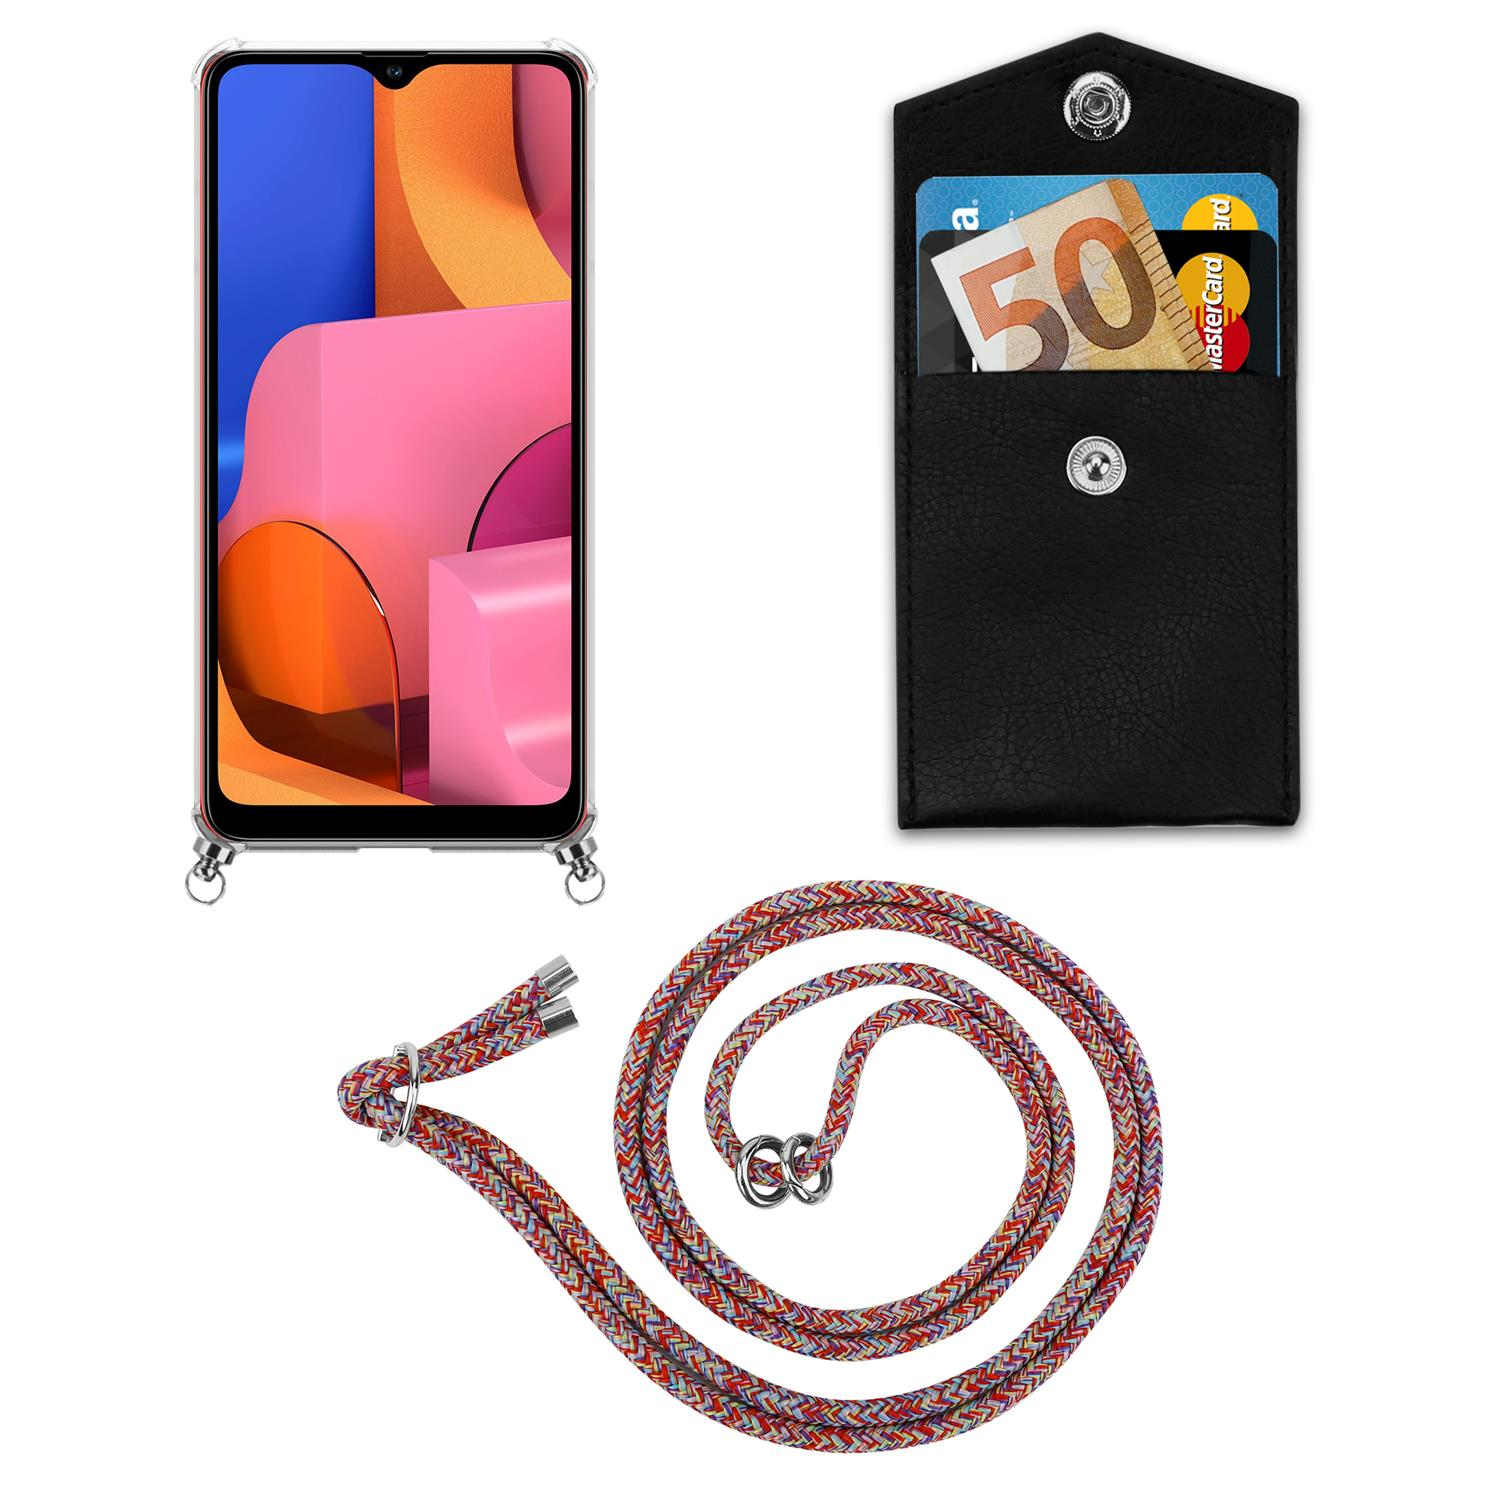 Kordel mit PARROT Silber A20s, abnehmbarer CADORABO Hülle, Kette Galaxy Handy COLORFUL Ringen, Samsung, Backcover, Band und